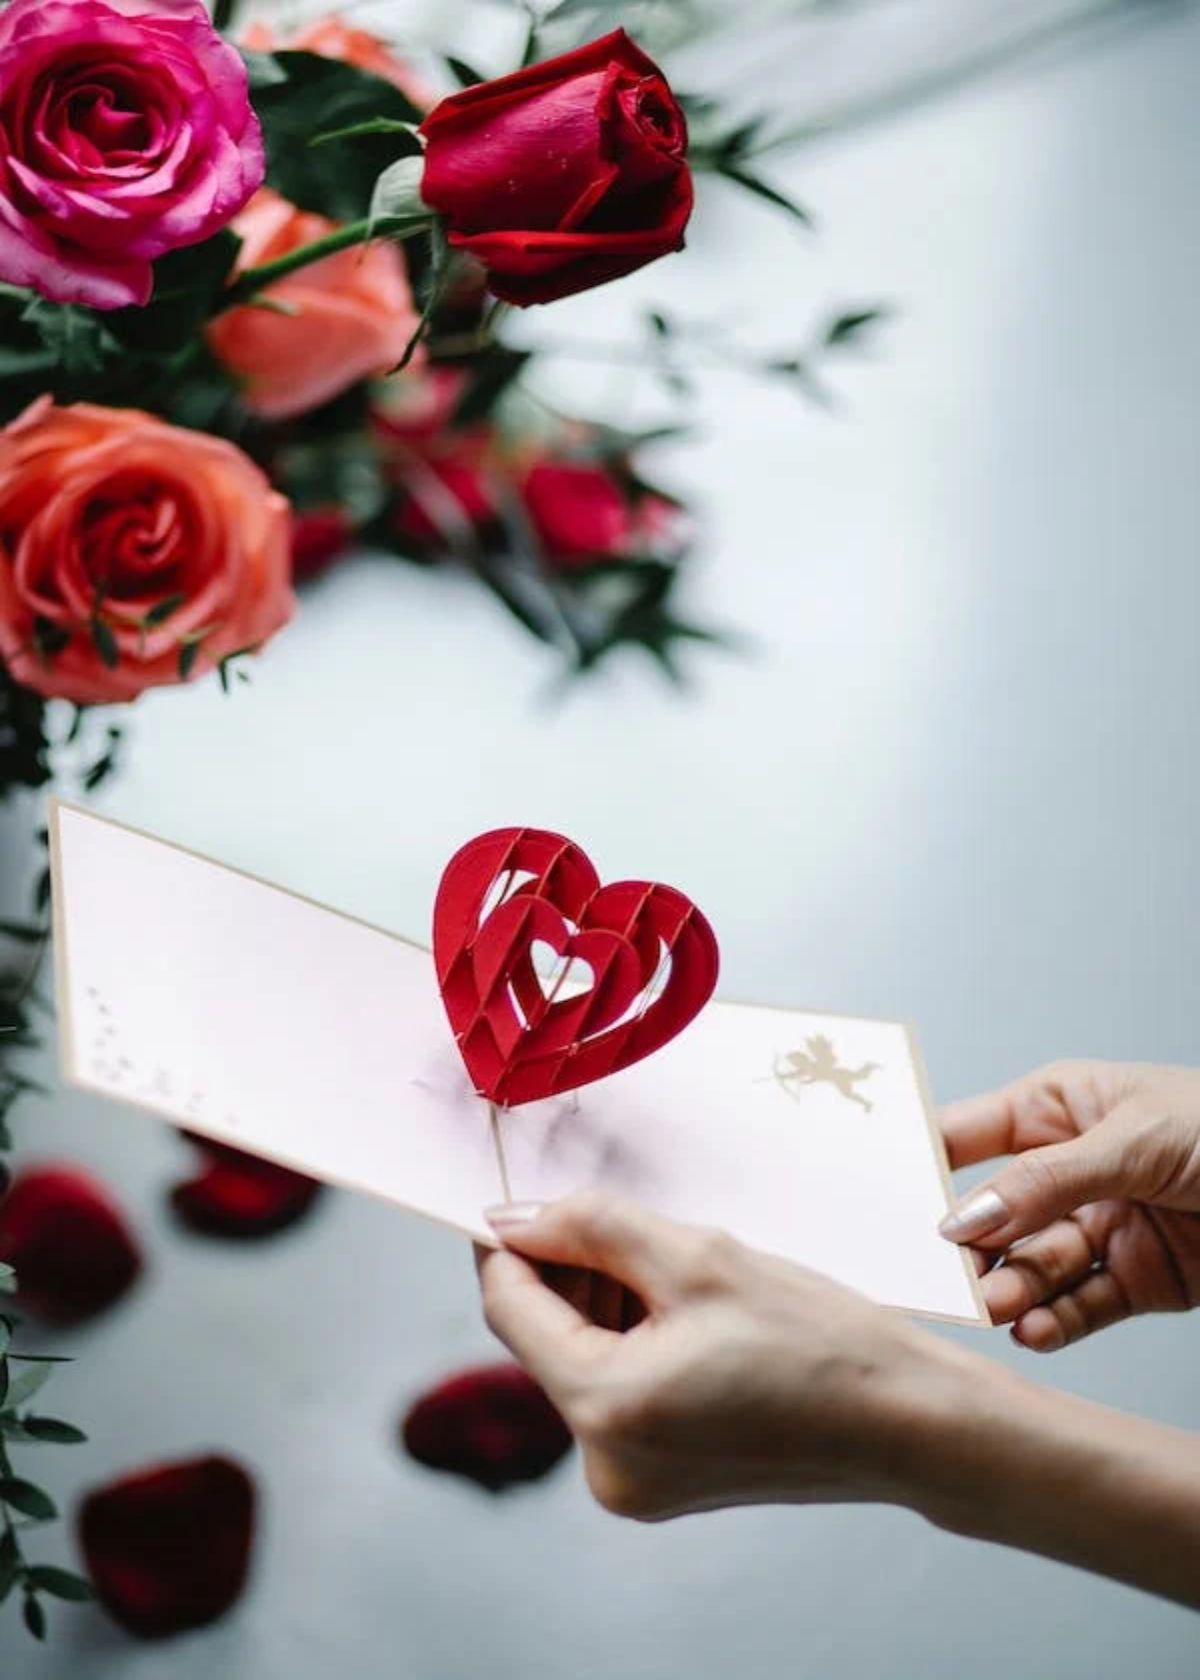 Best Valentine's Day Gifts For Your Wife  That She'll Love To Show Off (and Actually Use!)